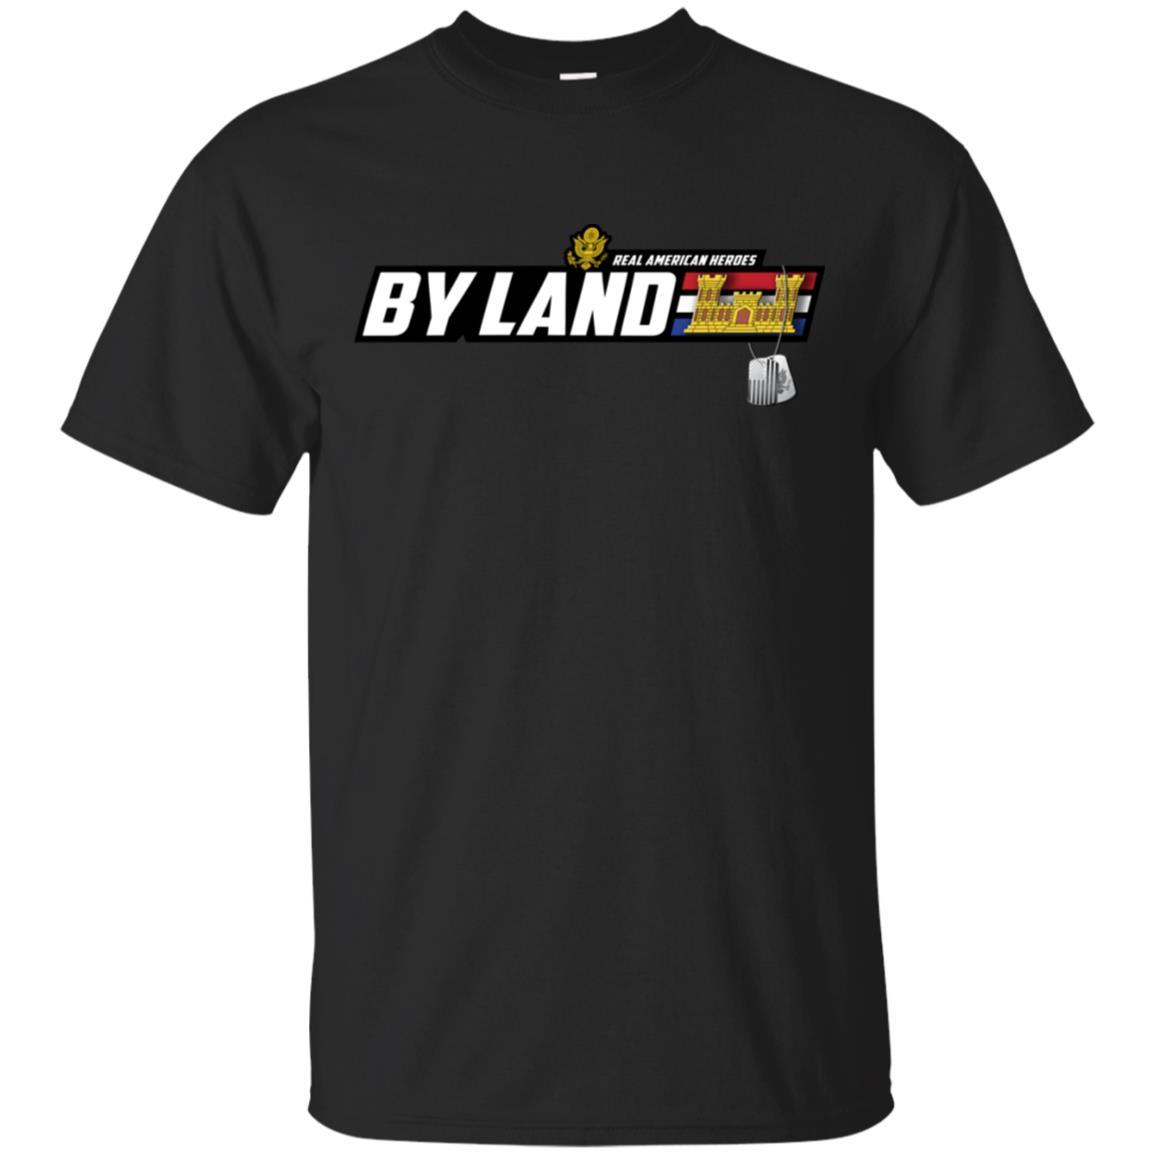 US Army T-Shirt "Corps of Engineers Real American Heroes By Land" On Front-TShirt-Army-Veterans Nation